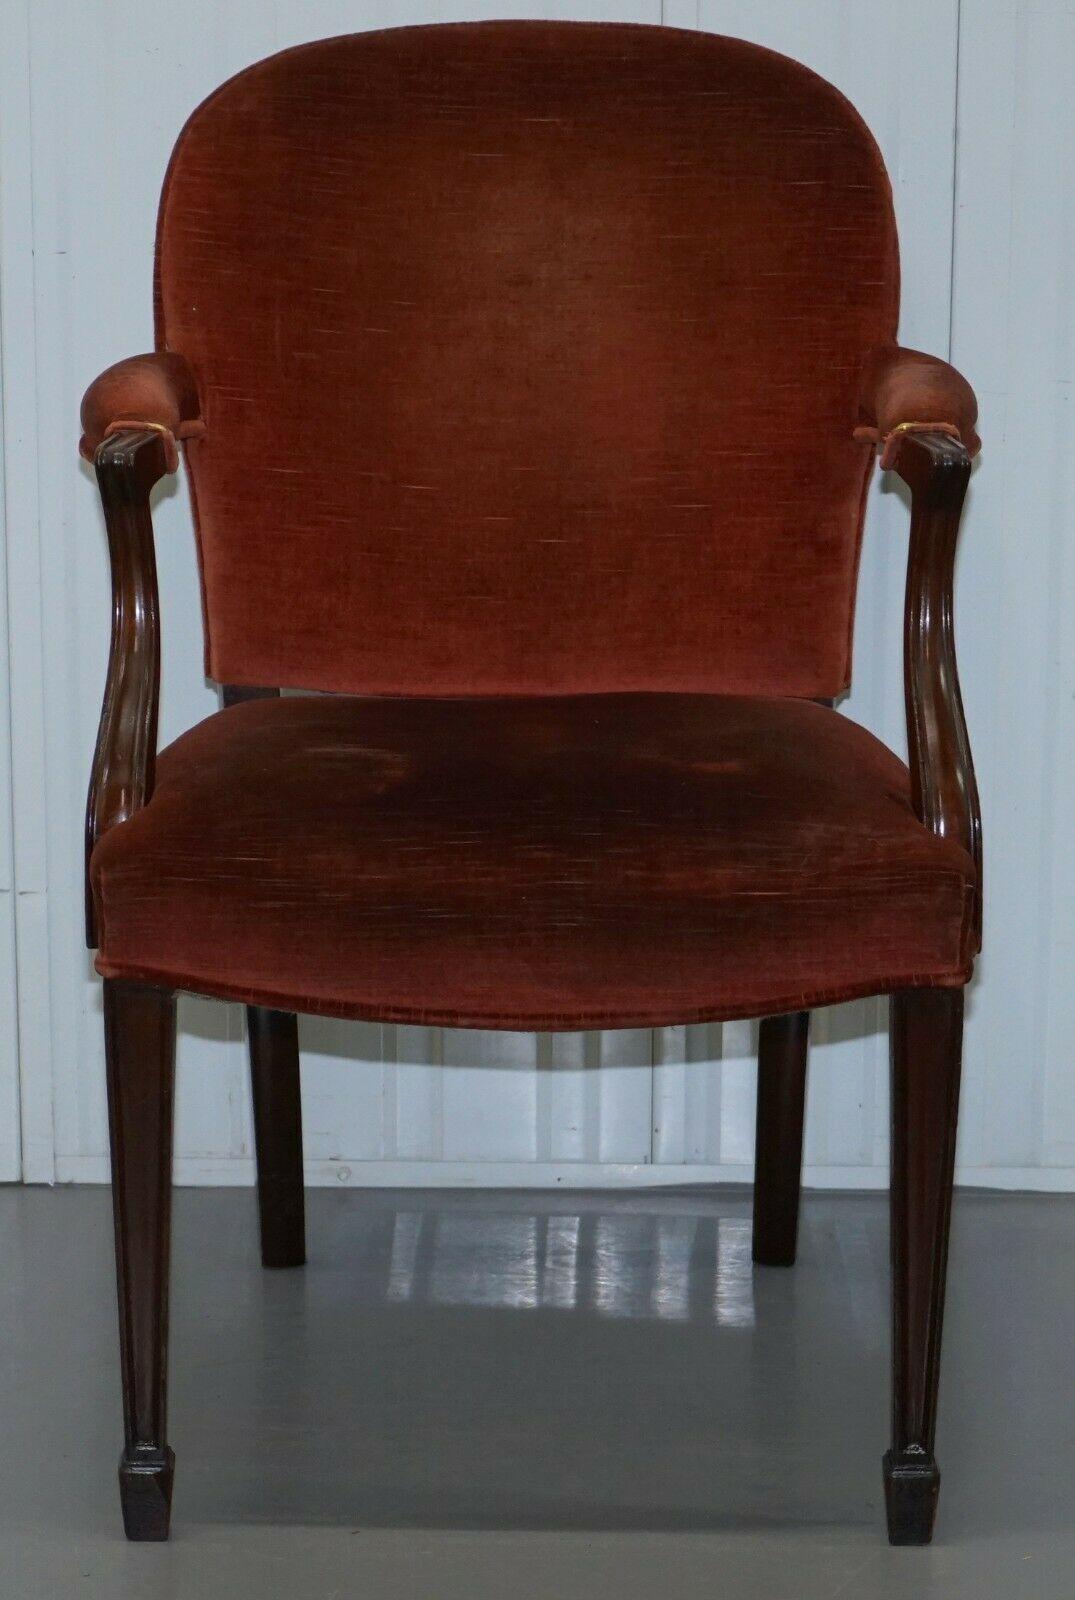 English Rare Antique Victorian J.Brand Stamped Armchair Horse Hair Filled Coil Sprung